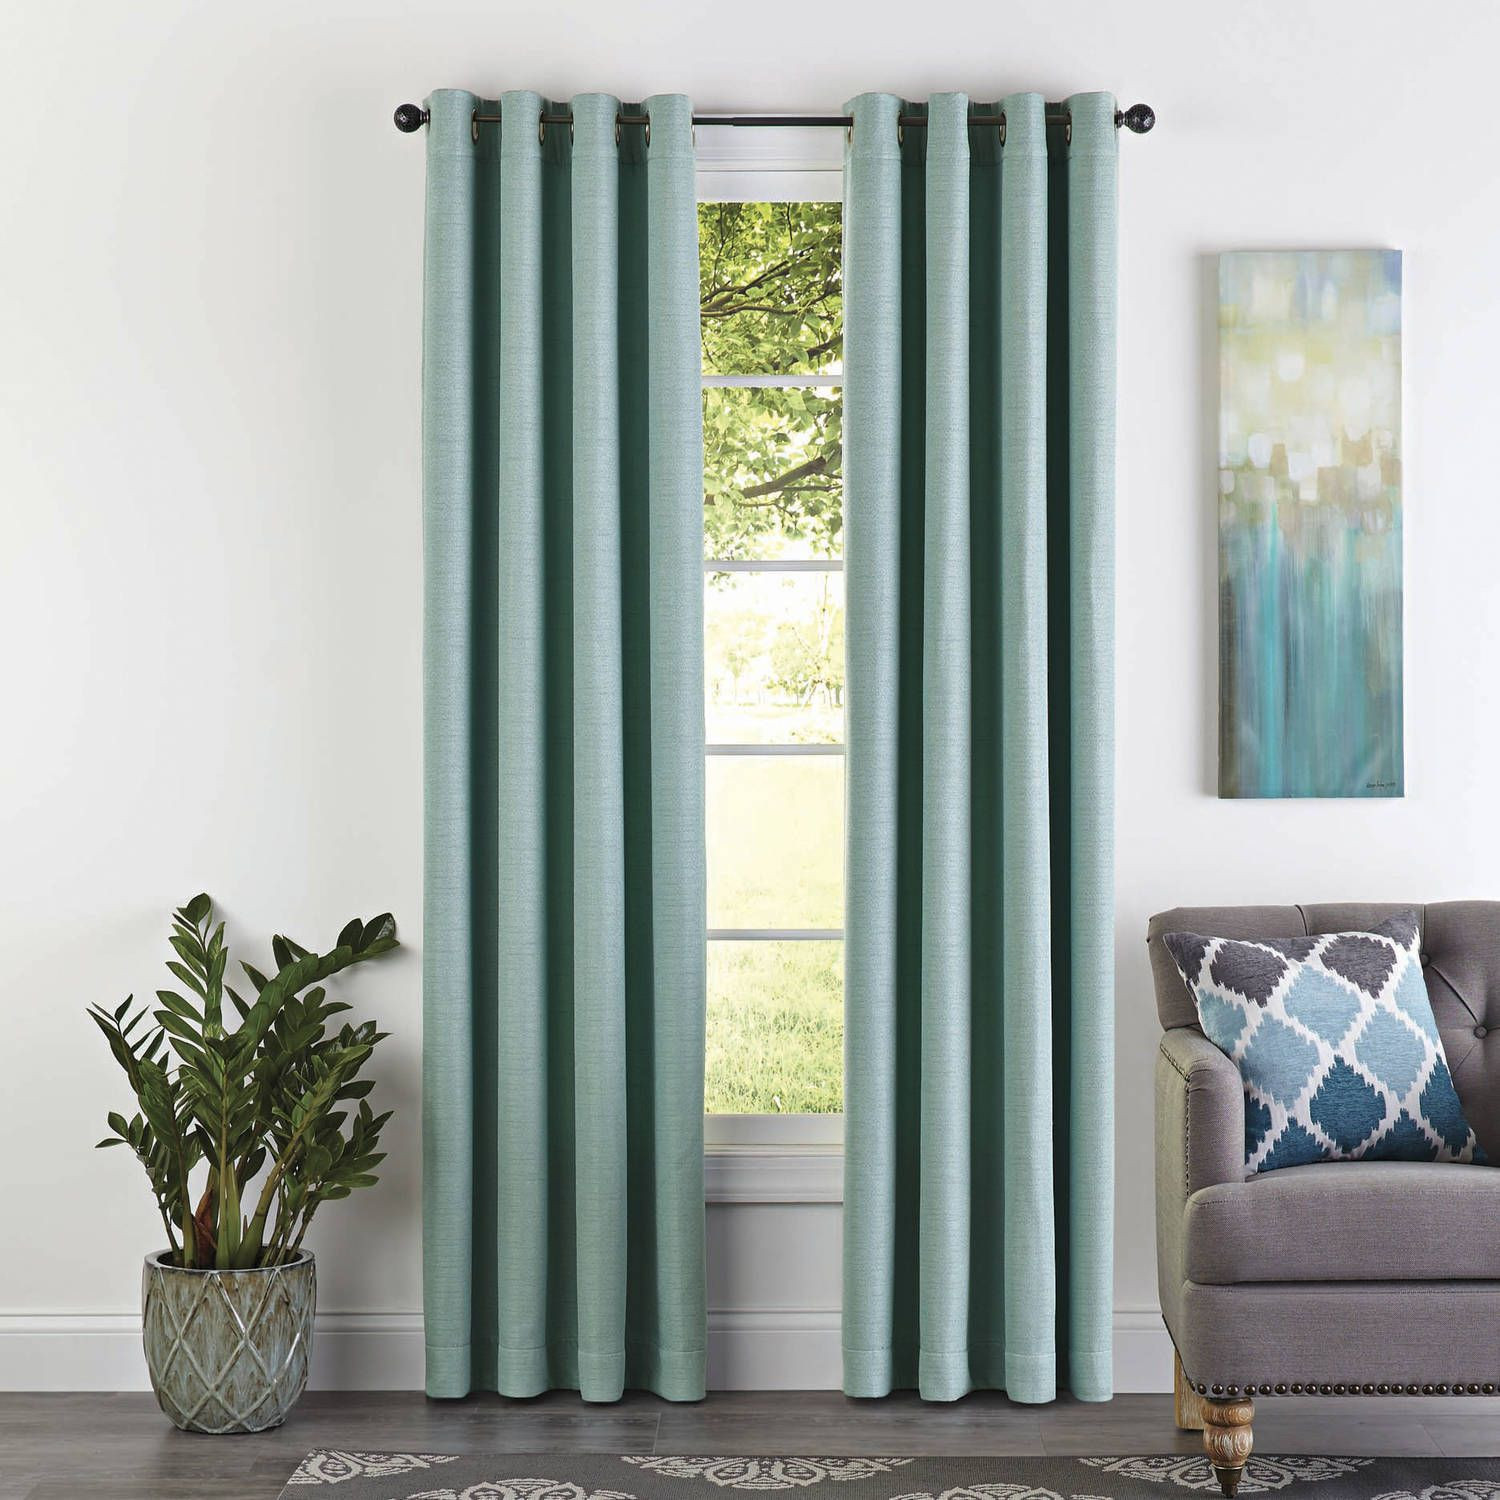 Walmart Curtains For Living Room
 Better Homes and Gardens Basketweave Curtain Panel